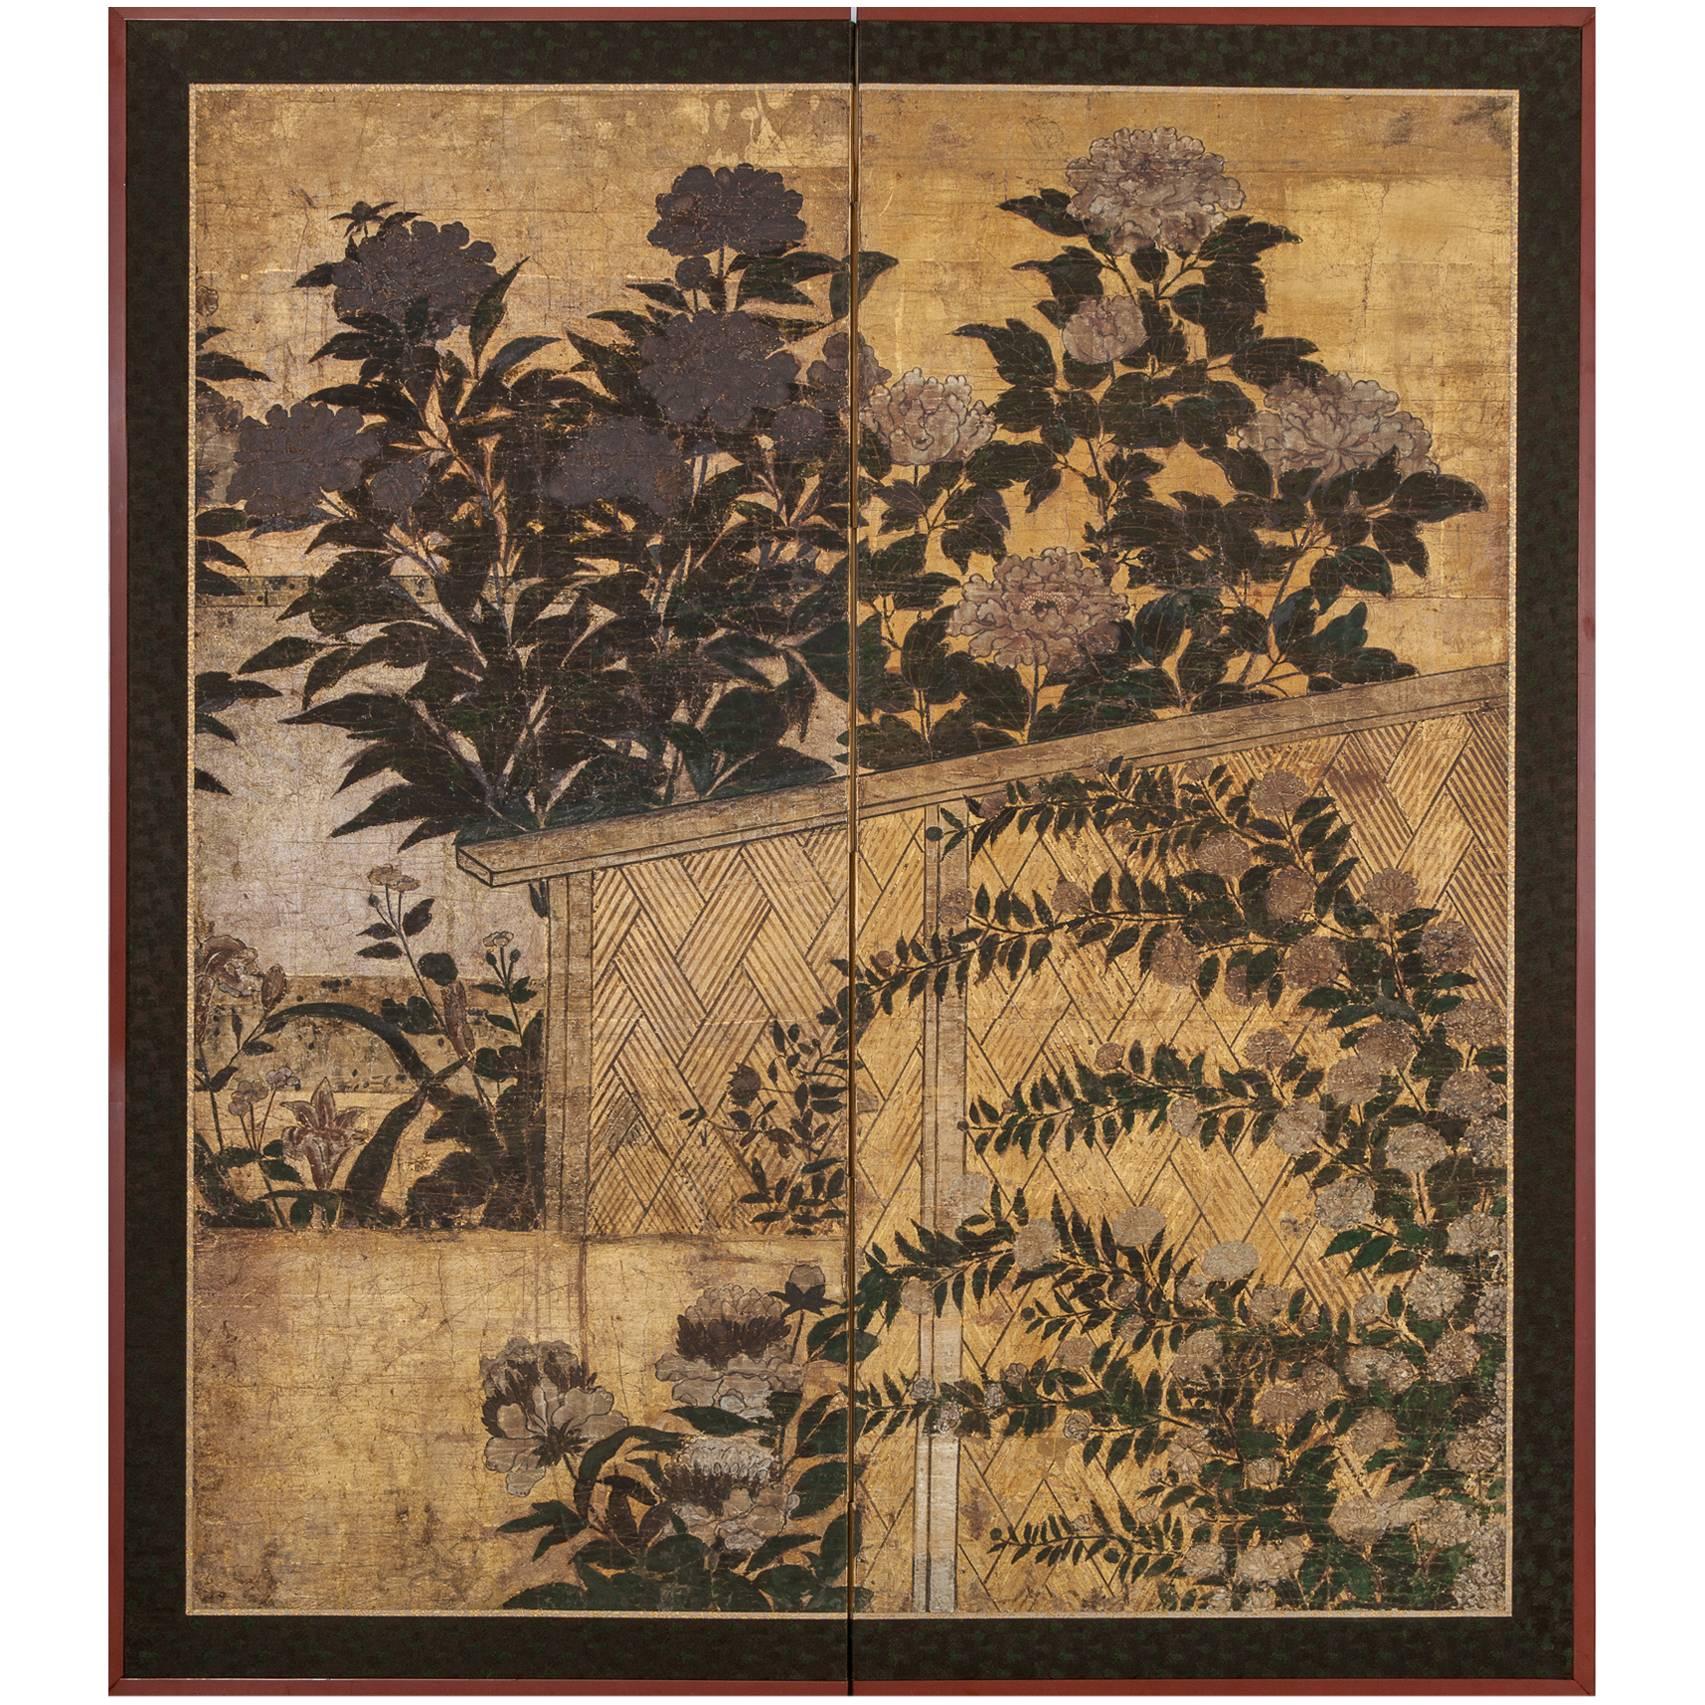 Japanese Two Panel Screen: Summer Flowers in a Garden Setting